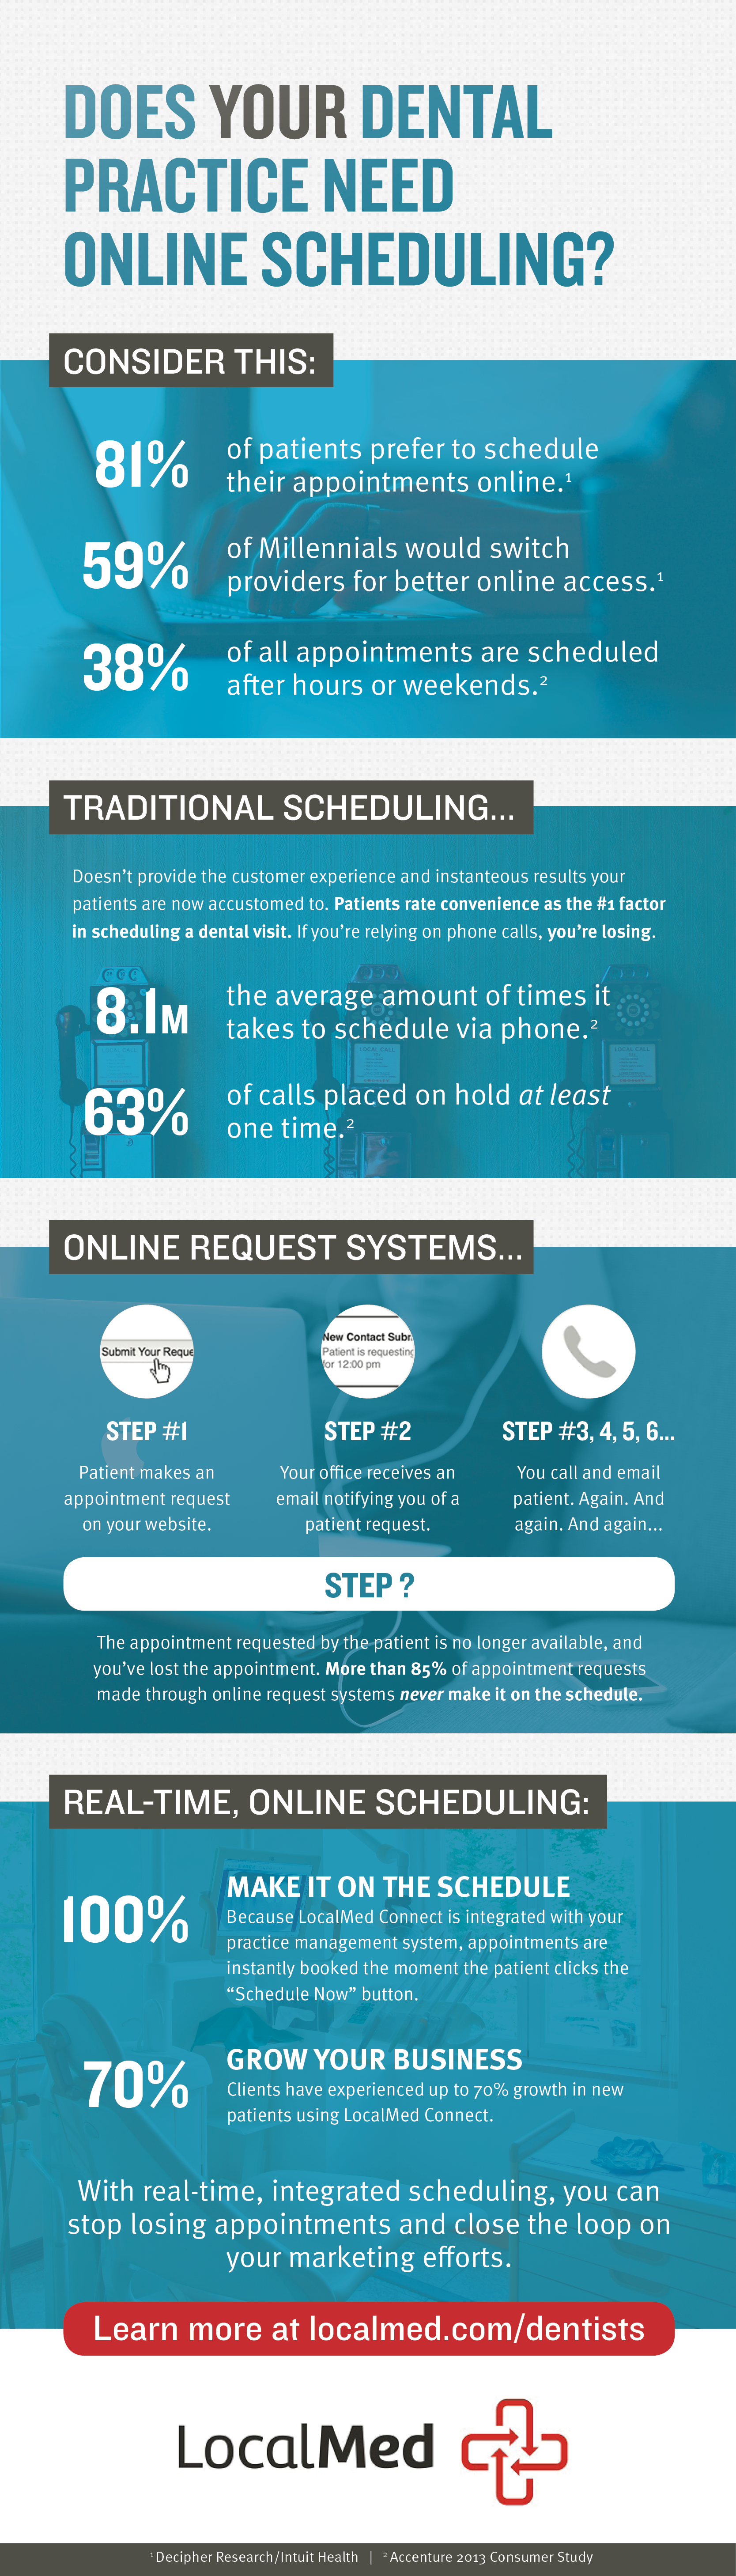 Infographic: Does YOUR dental practice need online scheduling?